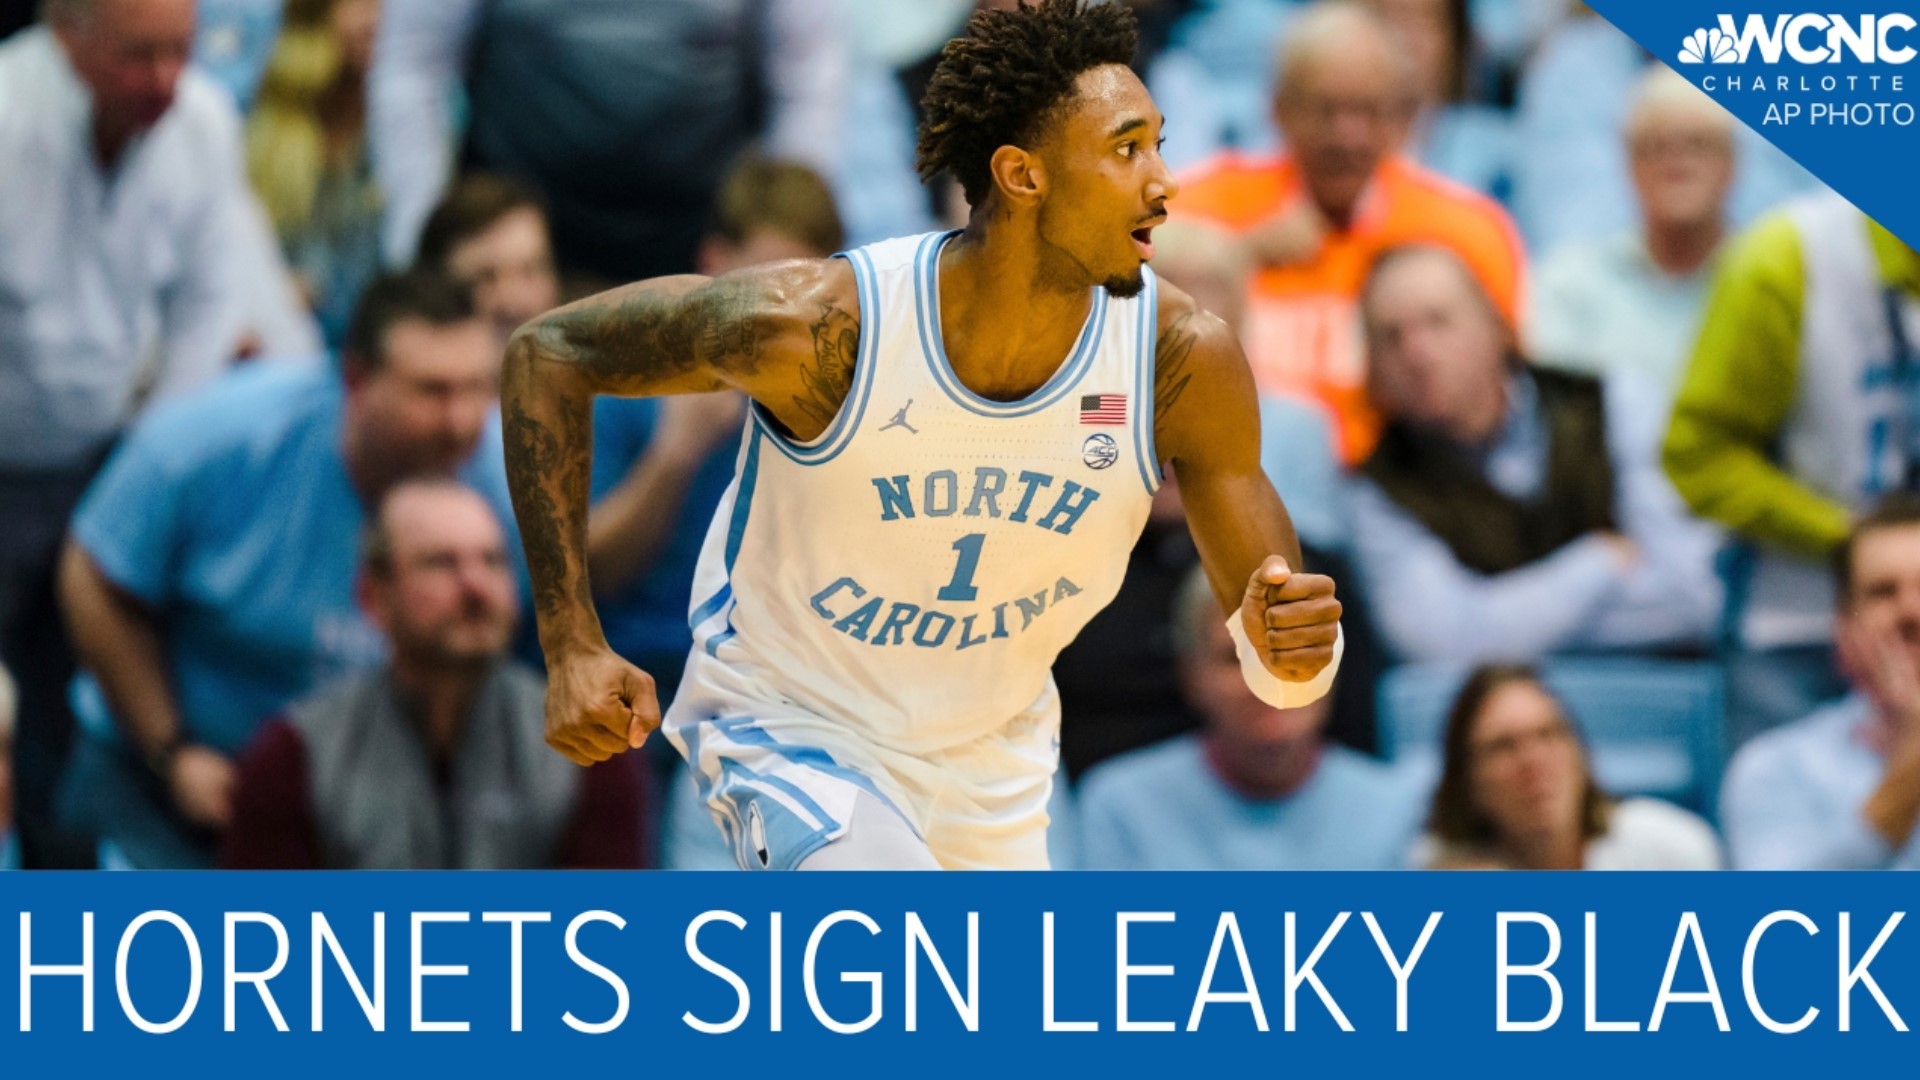 Leaky Black suits up for Hornets after career at UNC